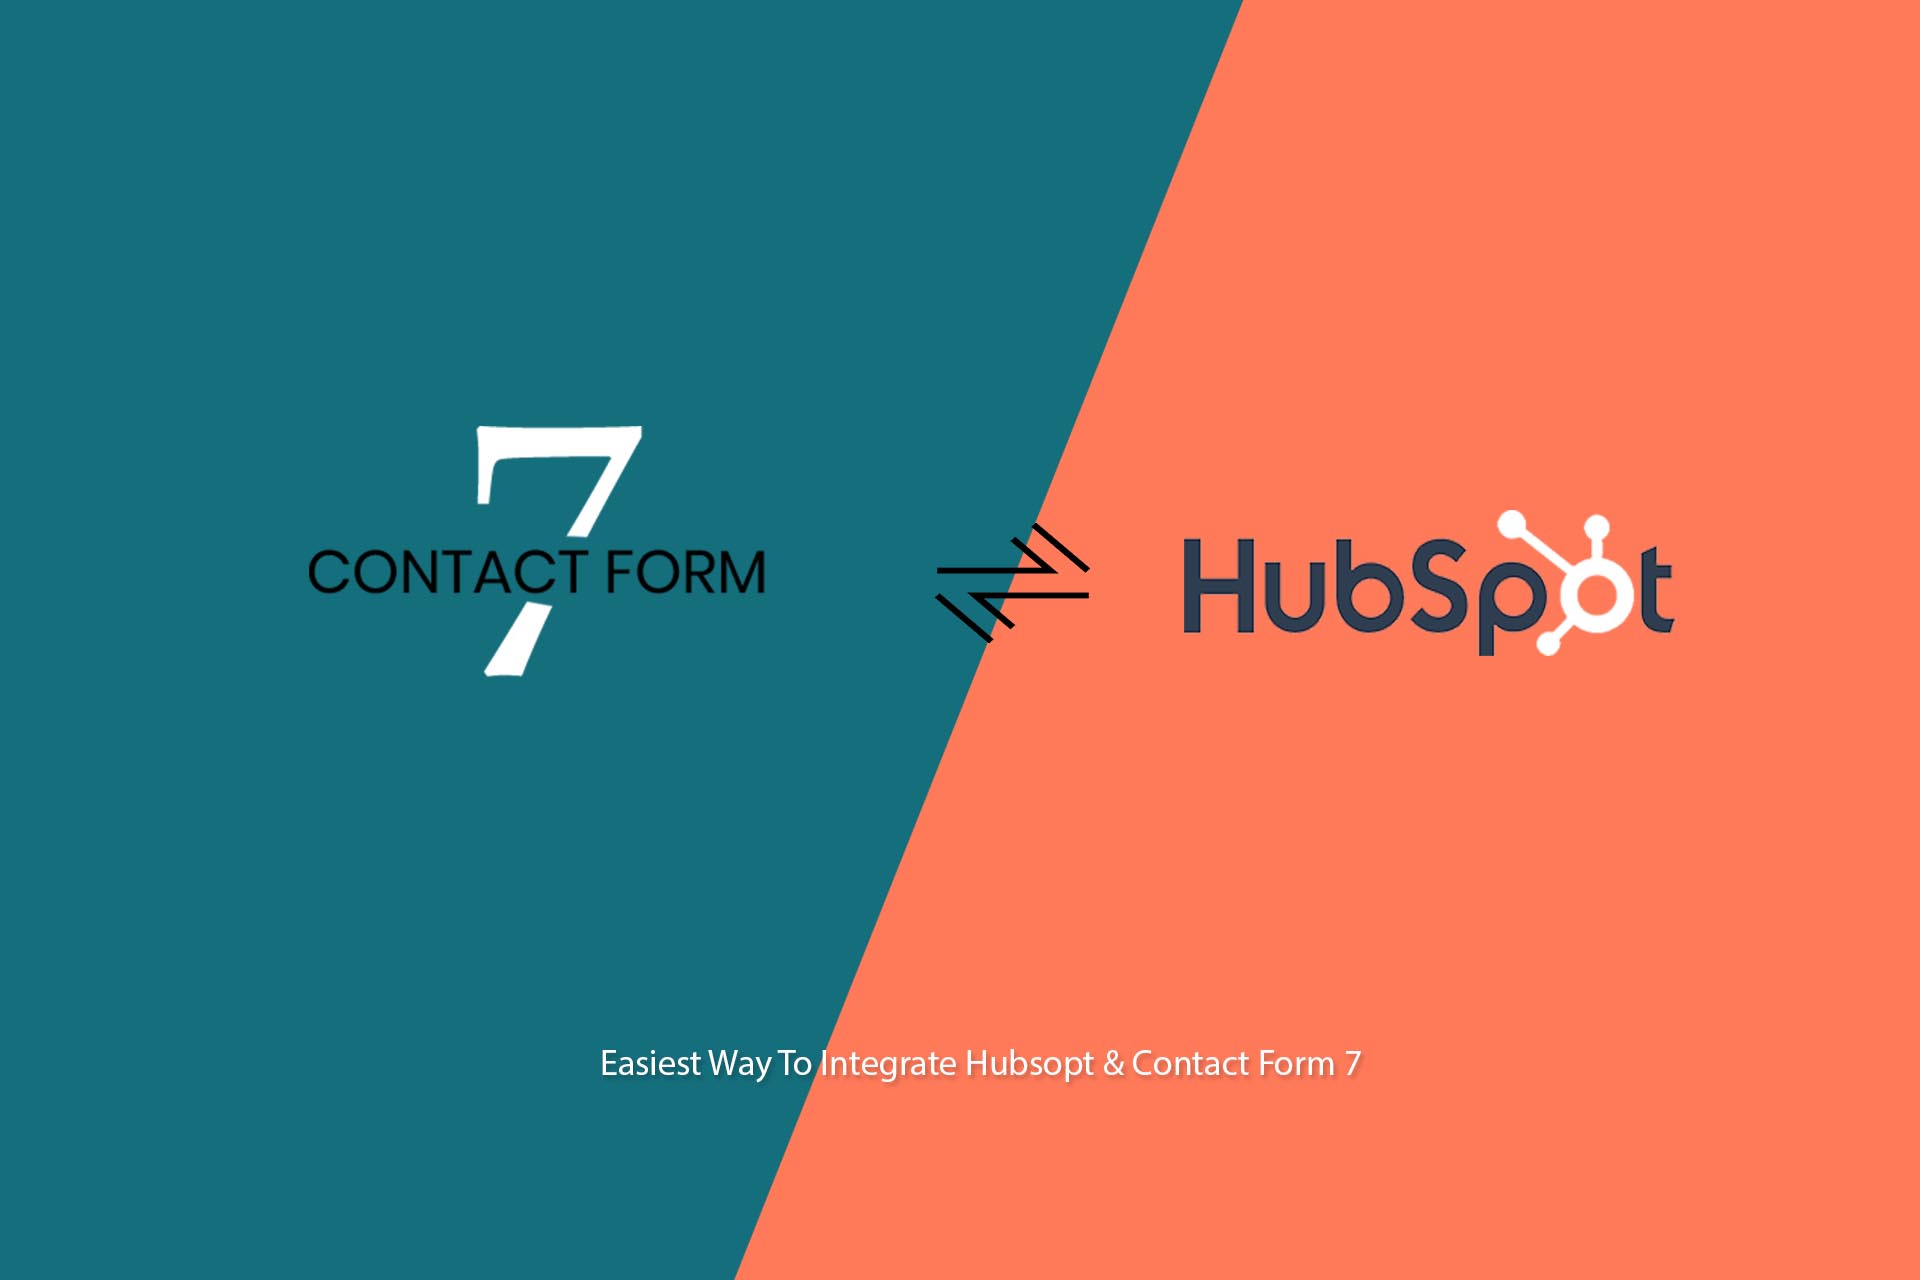 How to add contact form 7 data to hubspot